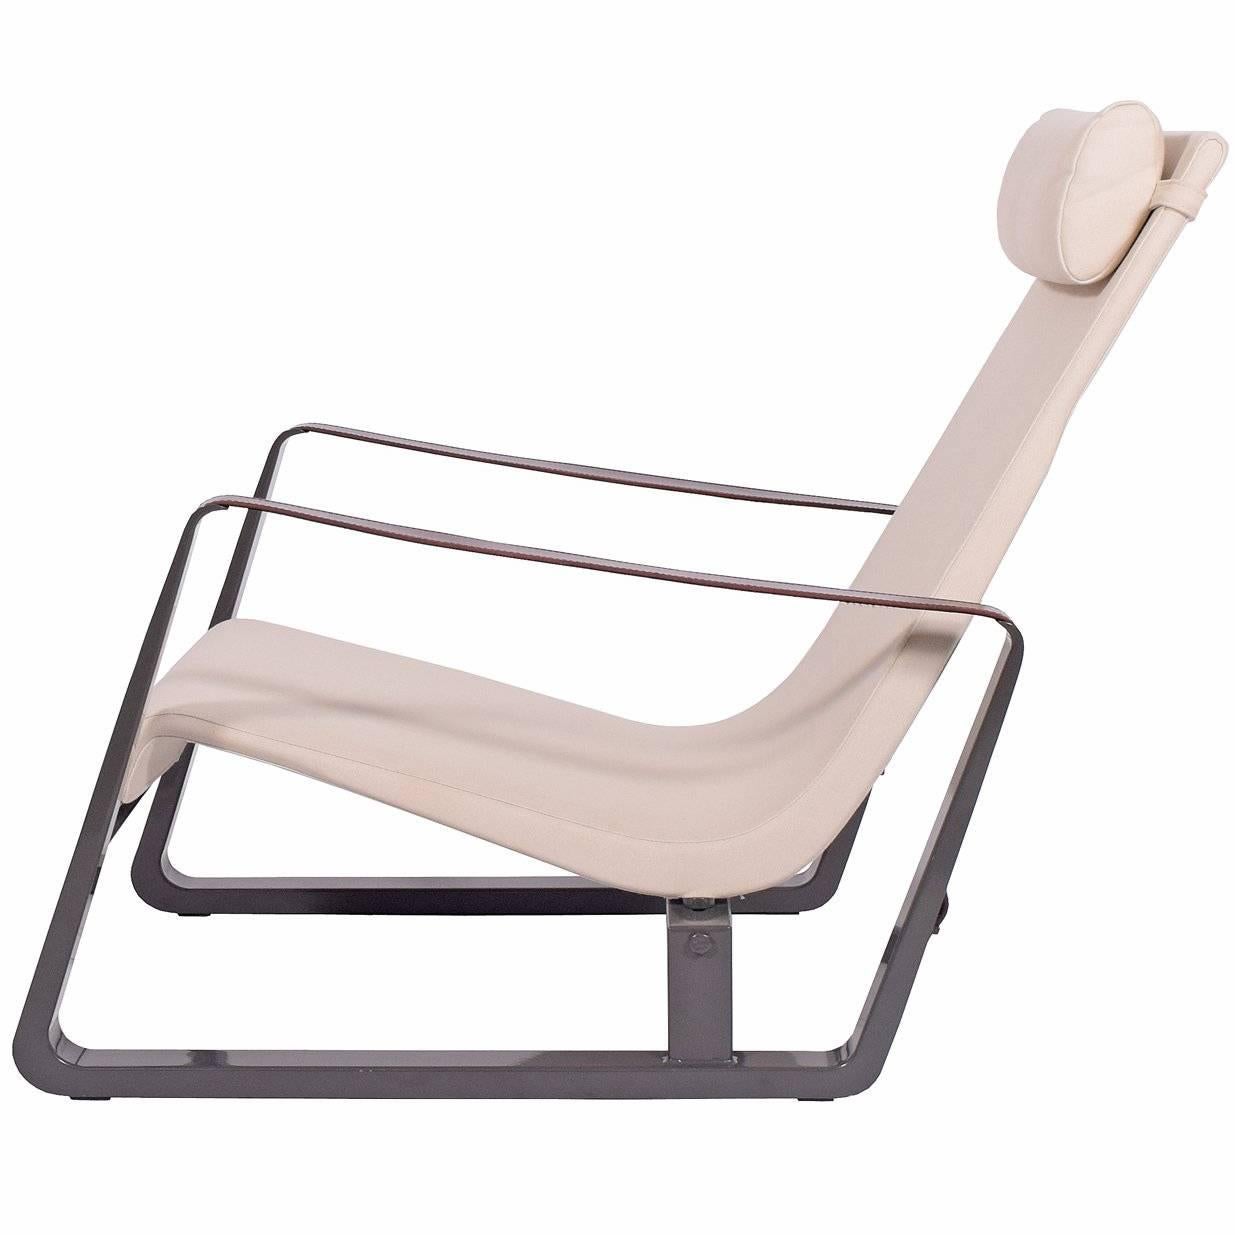 Cité Chair designed by Jean Prouvé, Row Office Edition by G-Star for Vitra